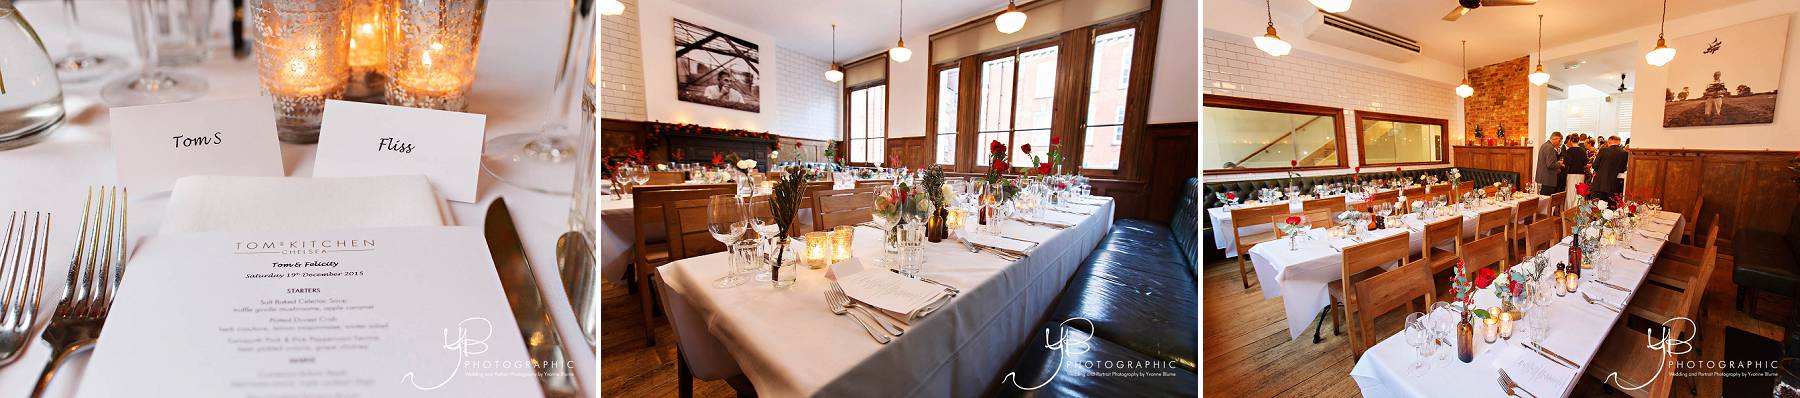 Wedding reception at Tom's Kitchen photographed by YBPHOTOGRAPHIC